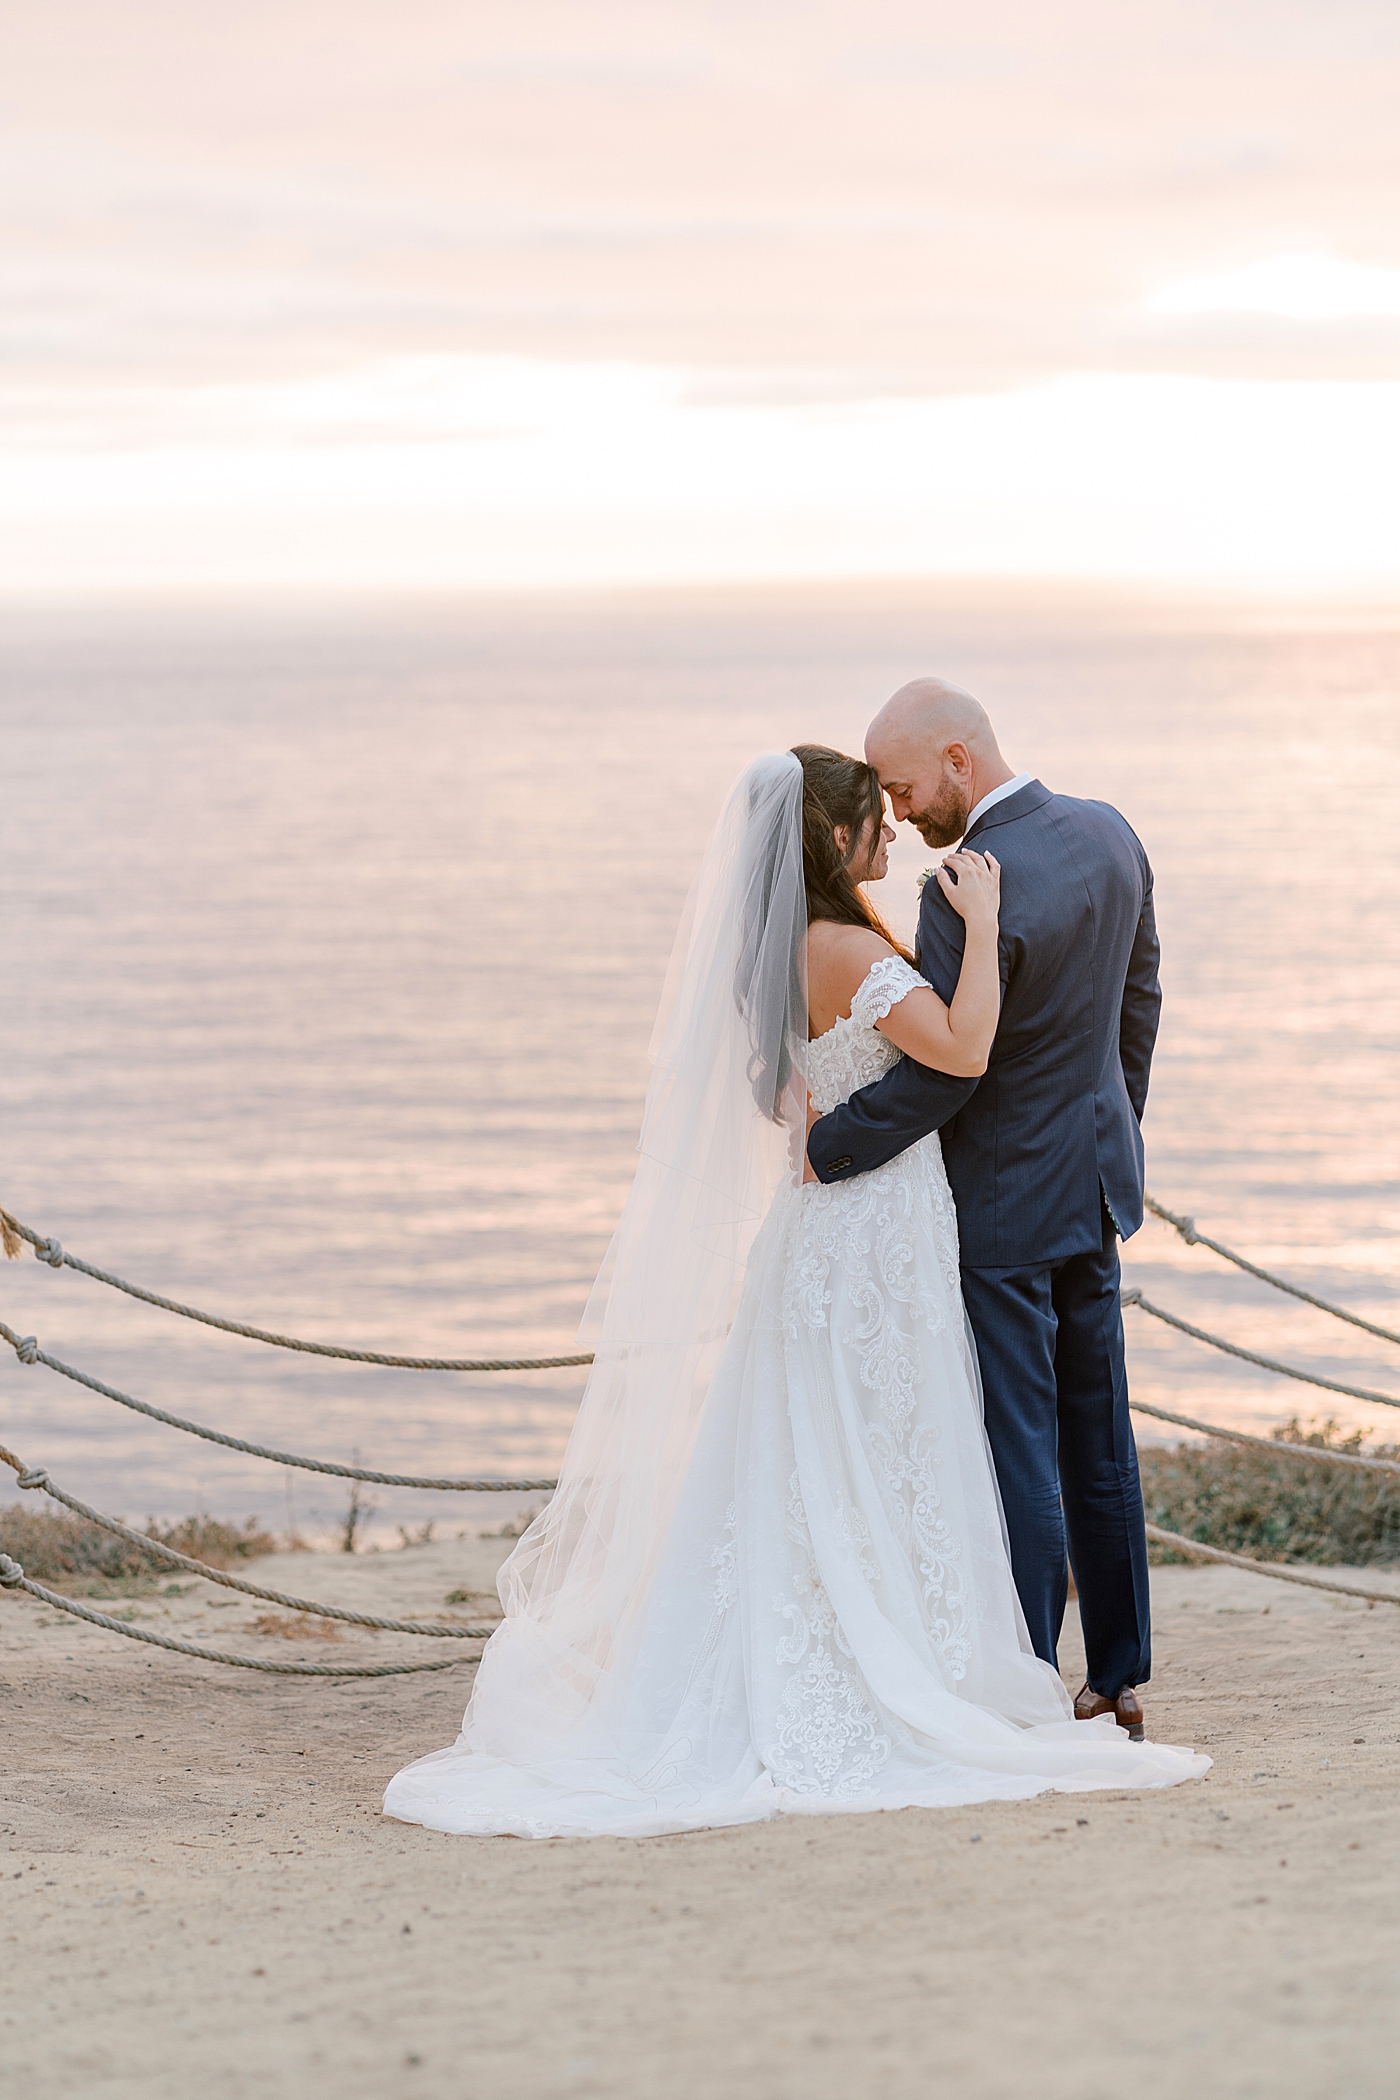 Groom in navy suit and bride in wedding dress holding each other closely on a seaside path at sunset | Image by San Diego Wedding Photographer Hope Helmuth